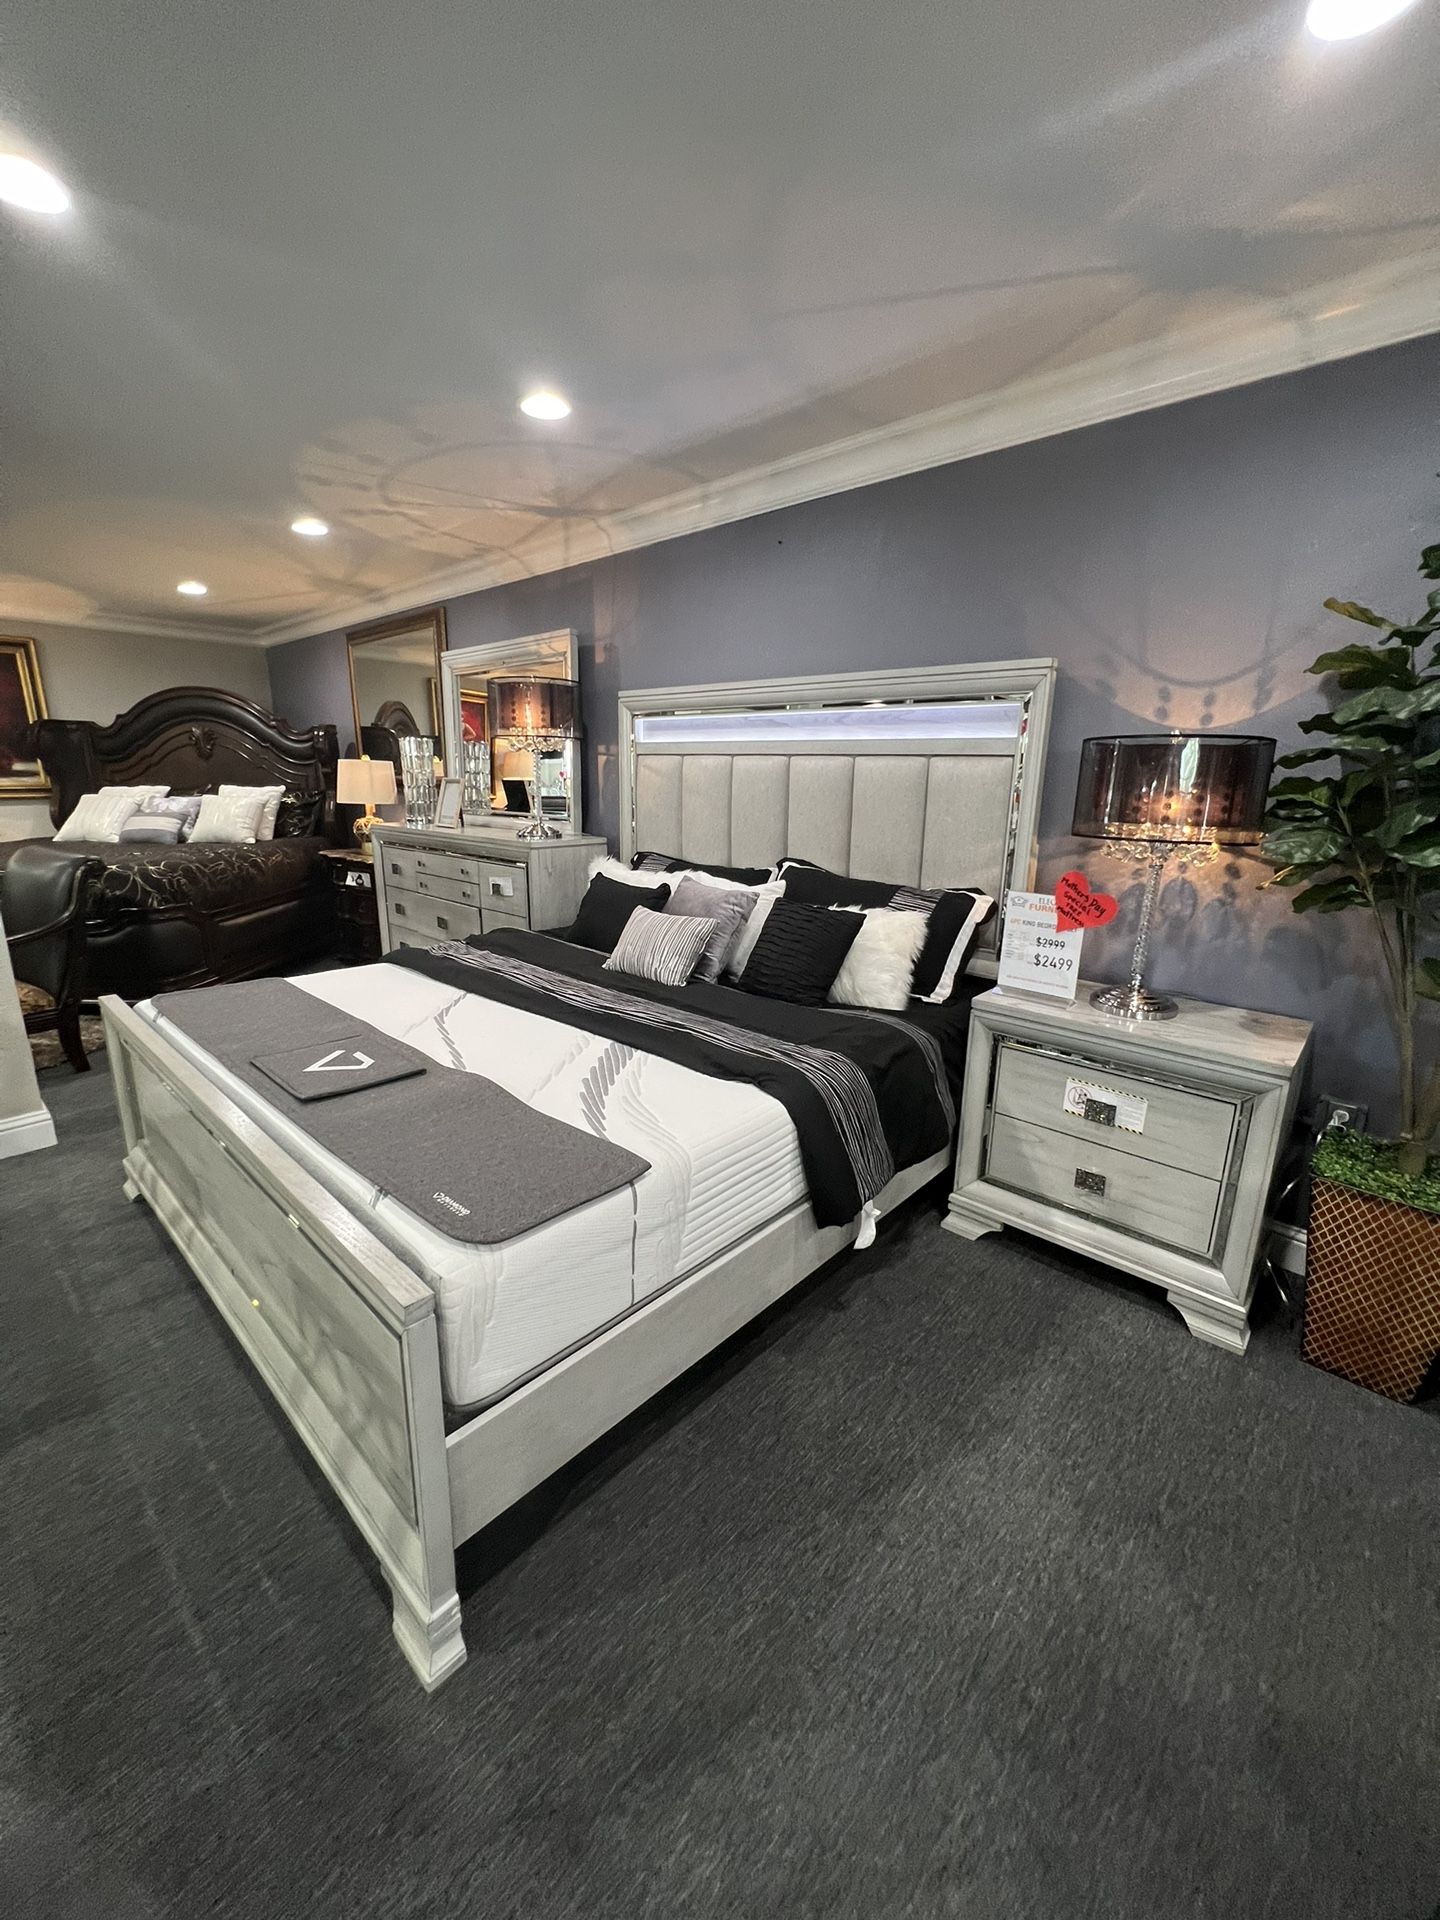 4 Pc King Bedroom Set With Free Mattress 🎈🎈🎈